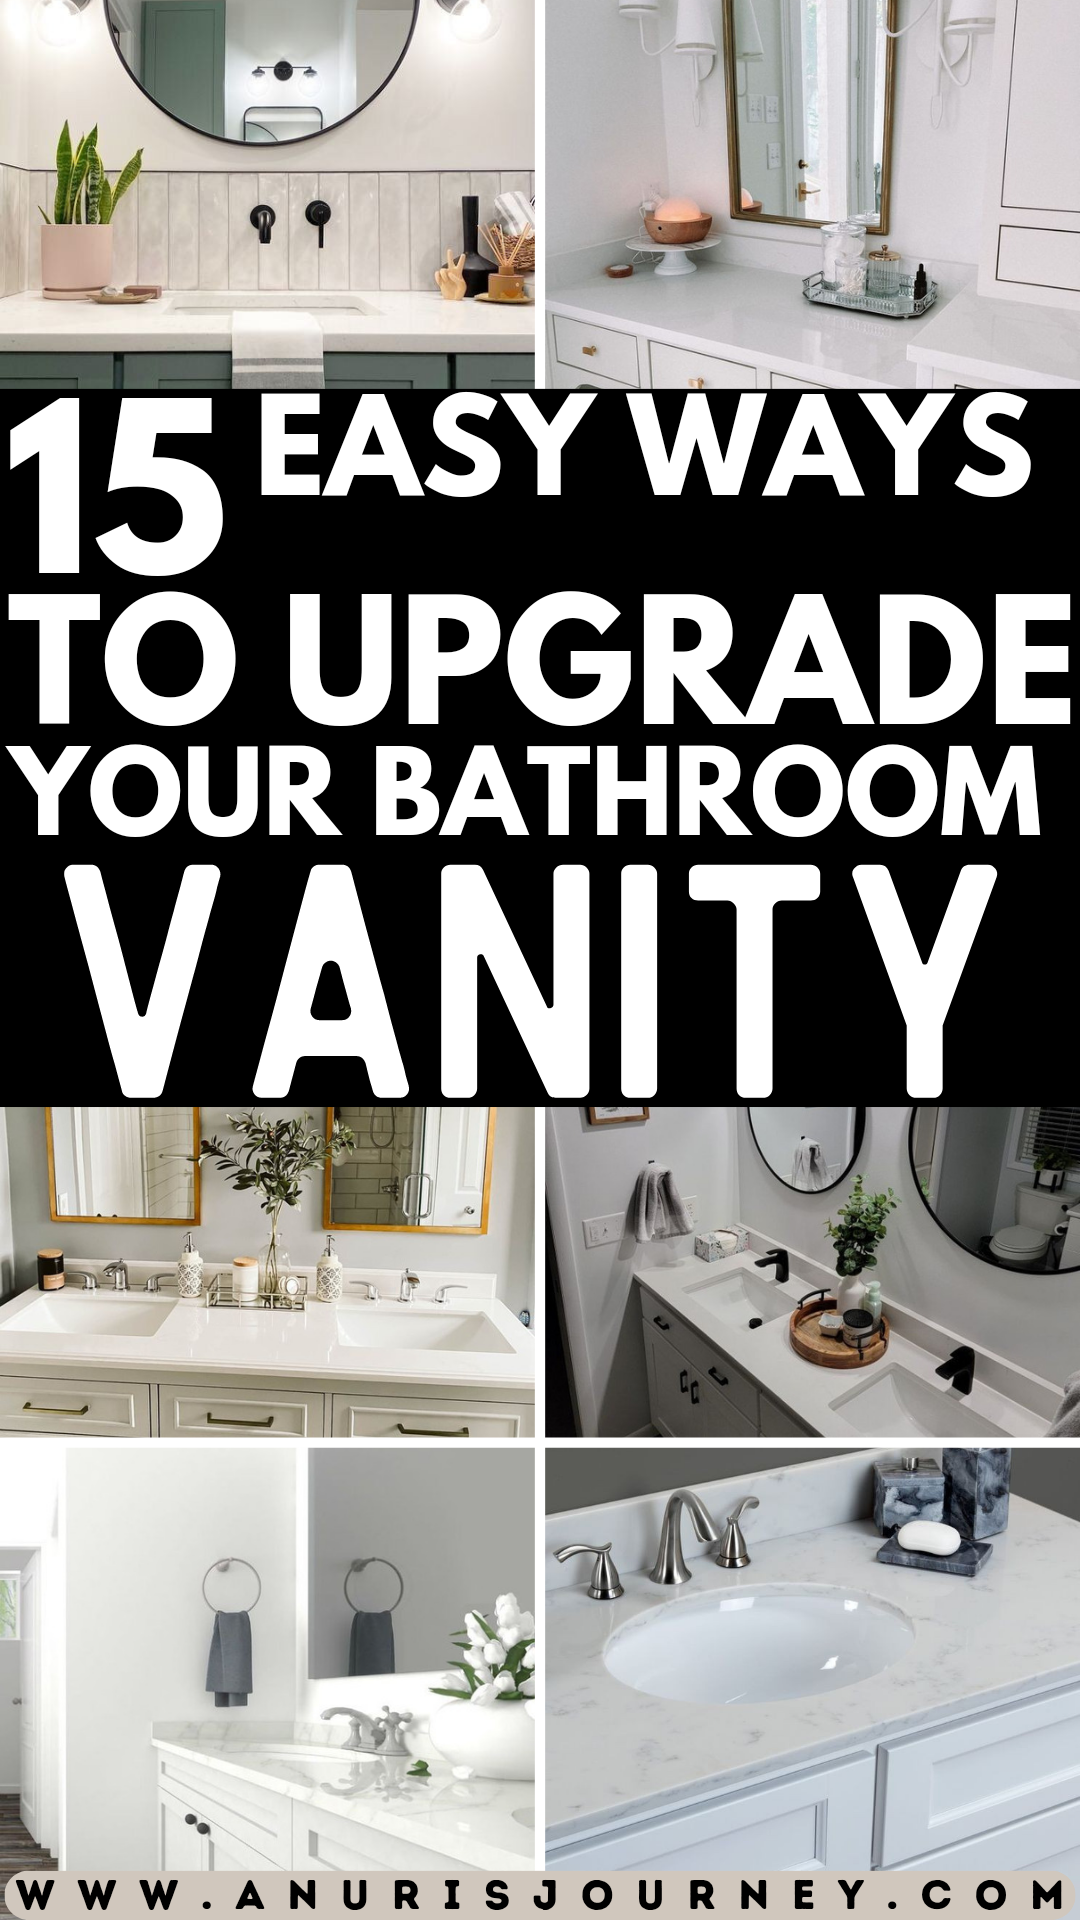 diy-tips-on-how-to-upgrade-your-bathroom-vanity-on-a-budget